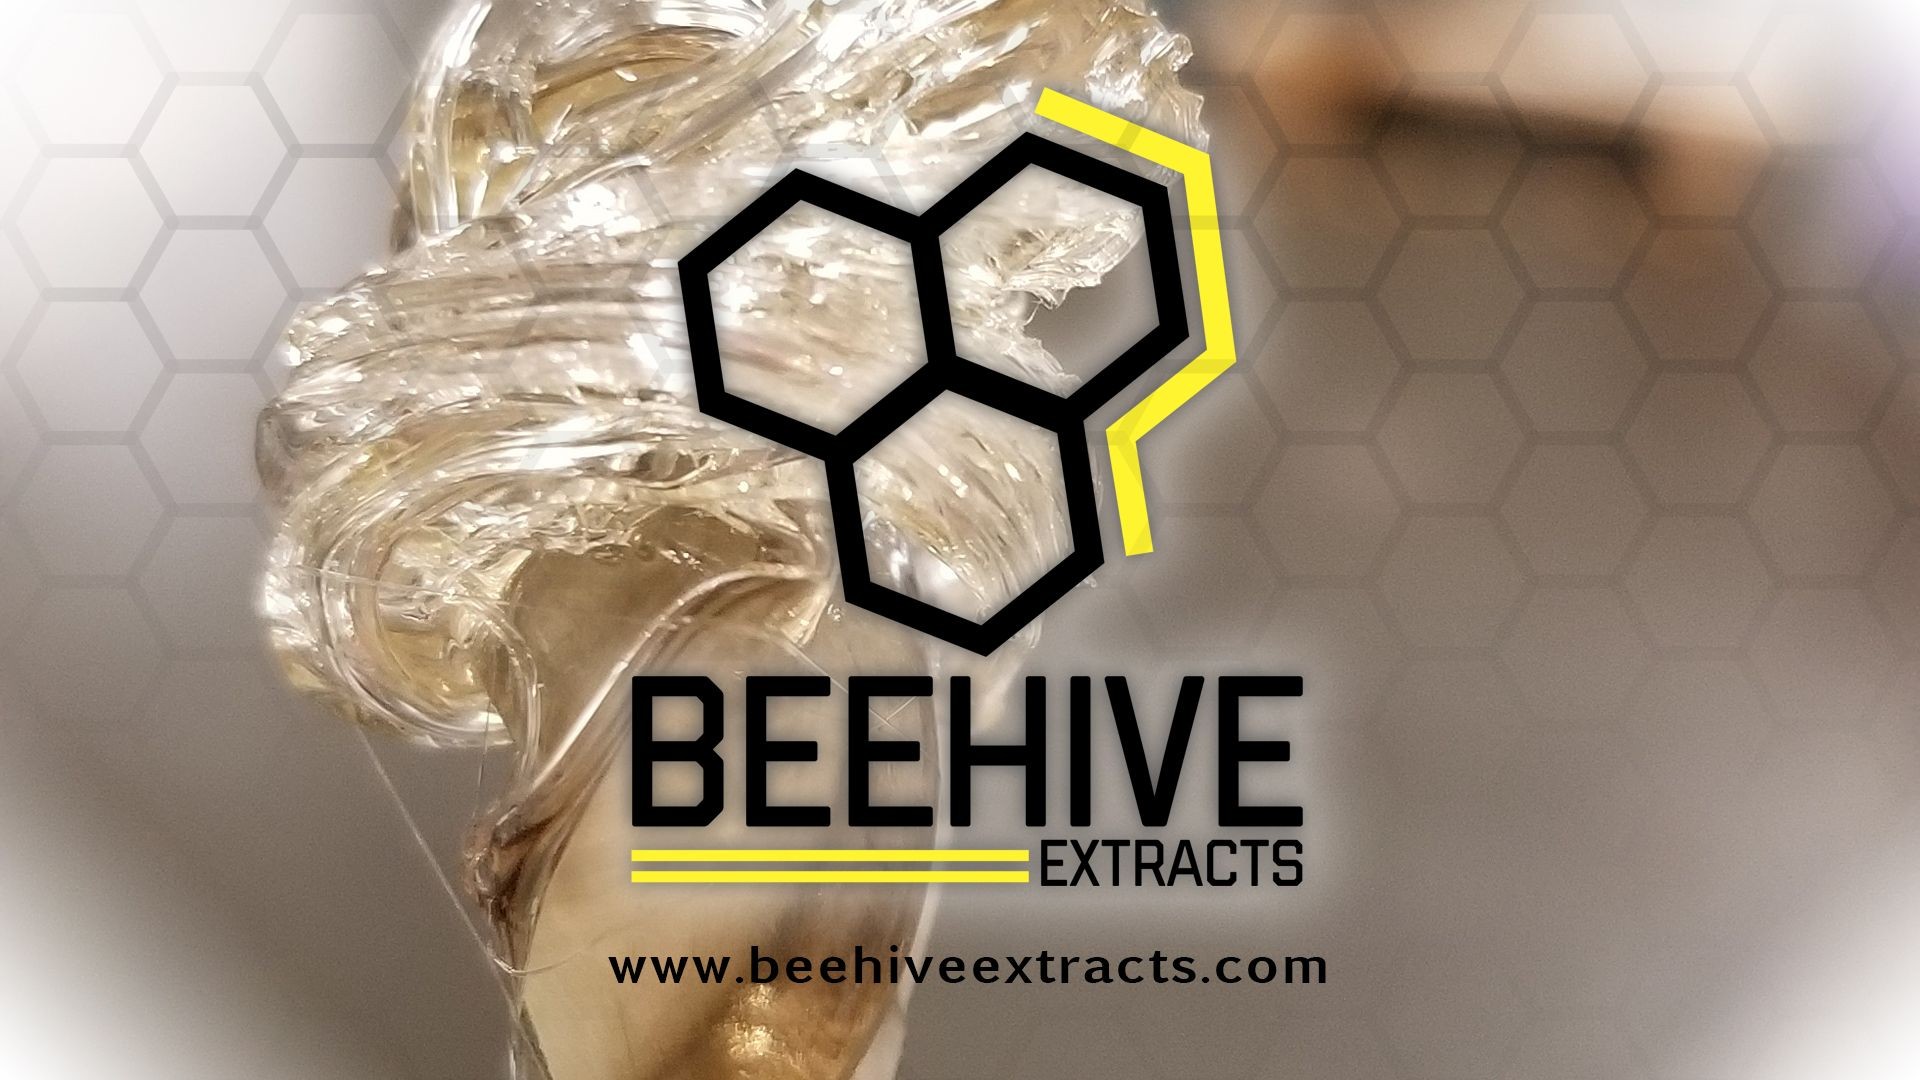 LAST CHANCE to SAVE! 30% OFF Beehive products this weekend!